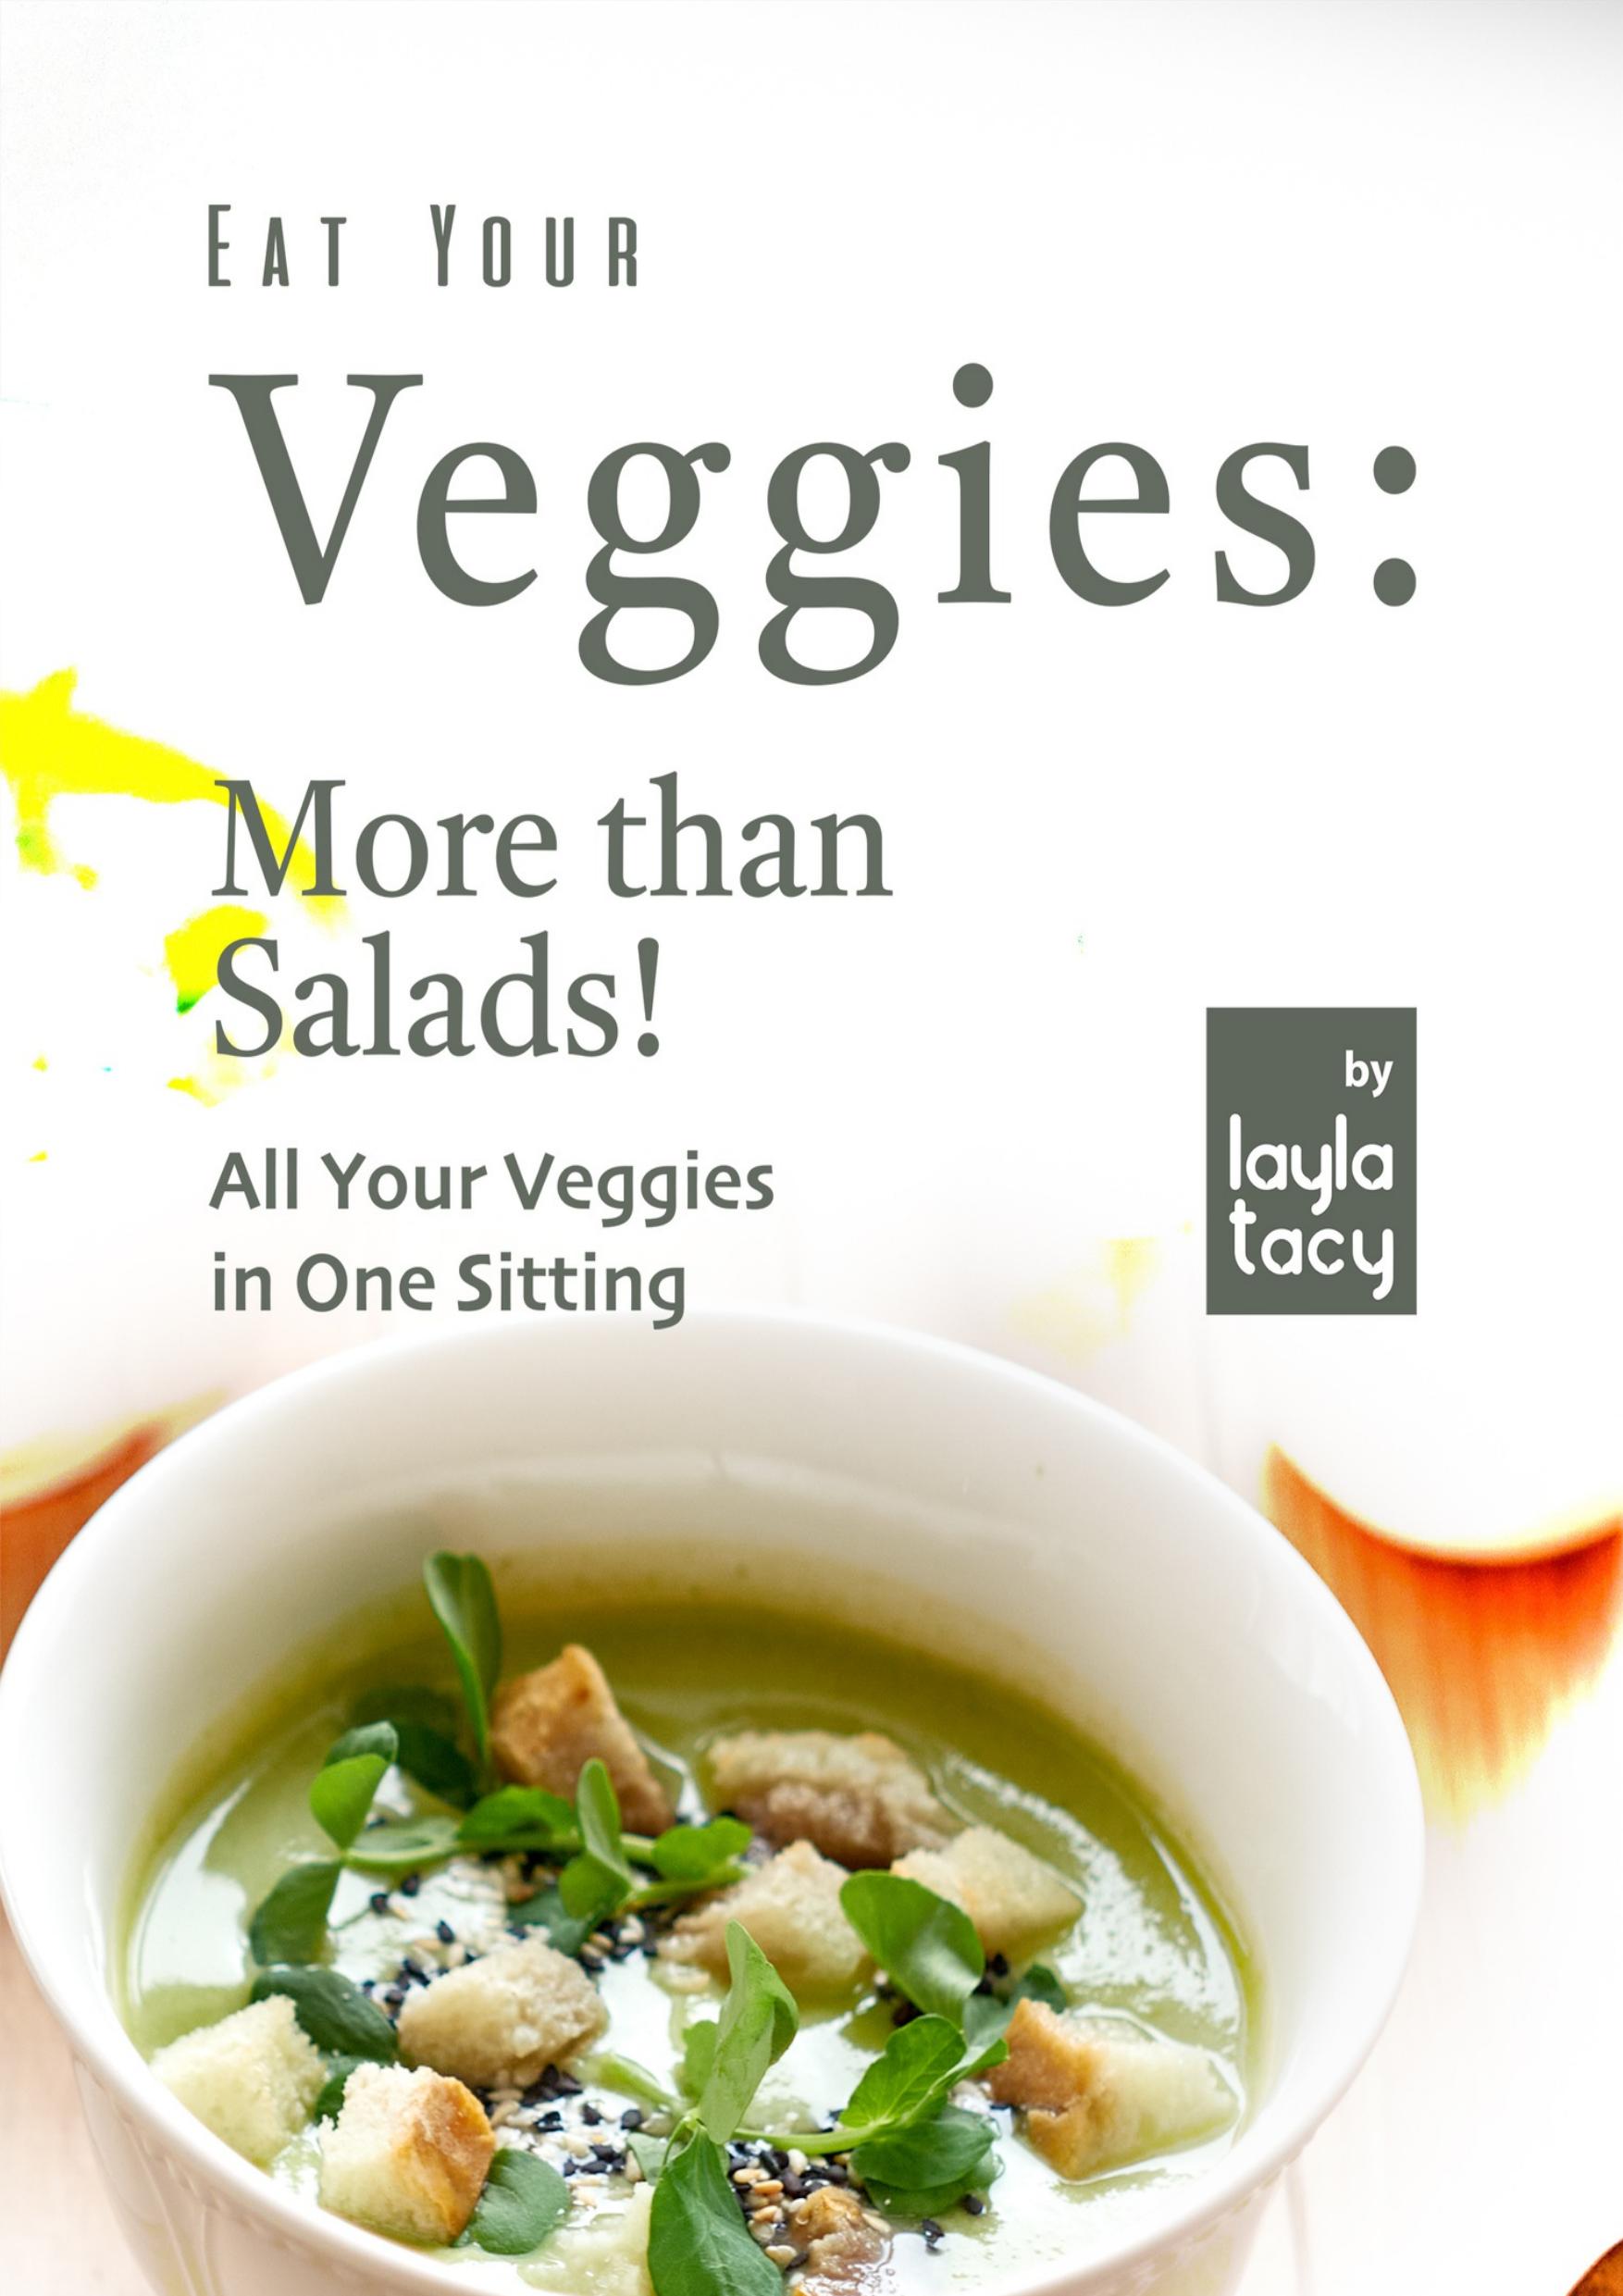 Eat Your Veggies: More than Salads!: All Your Veggies in One Sitting by Tacy Layla